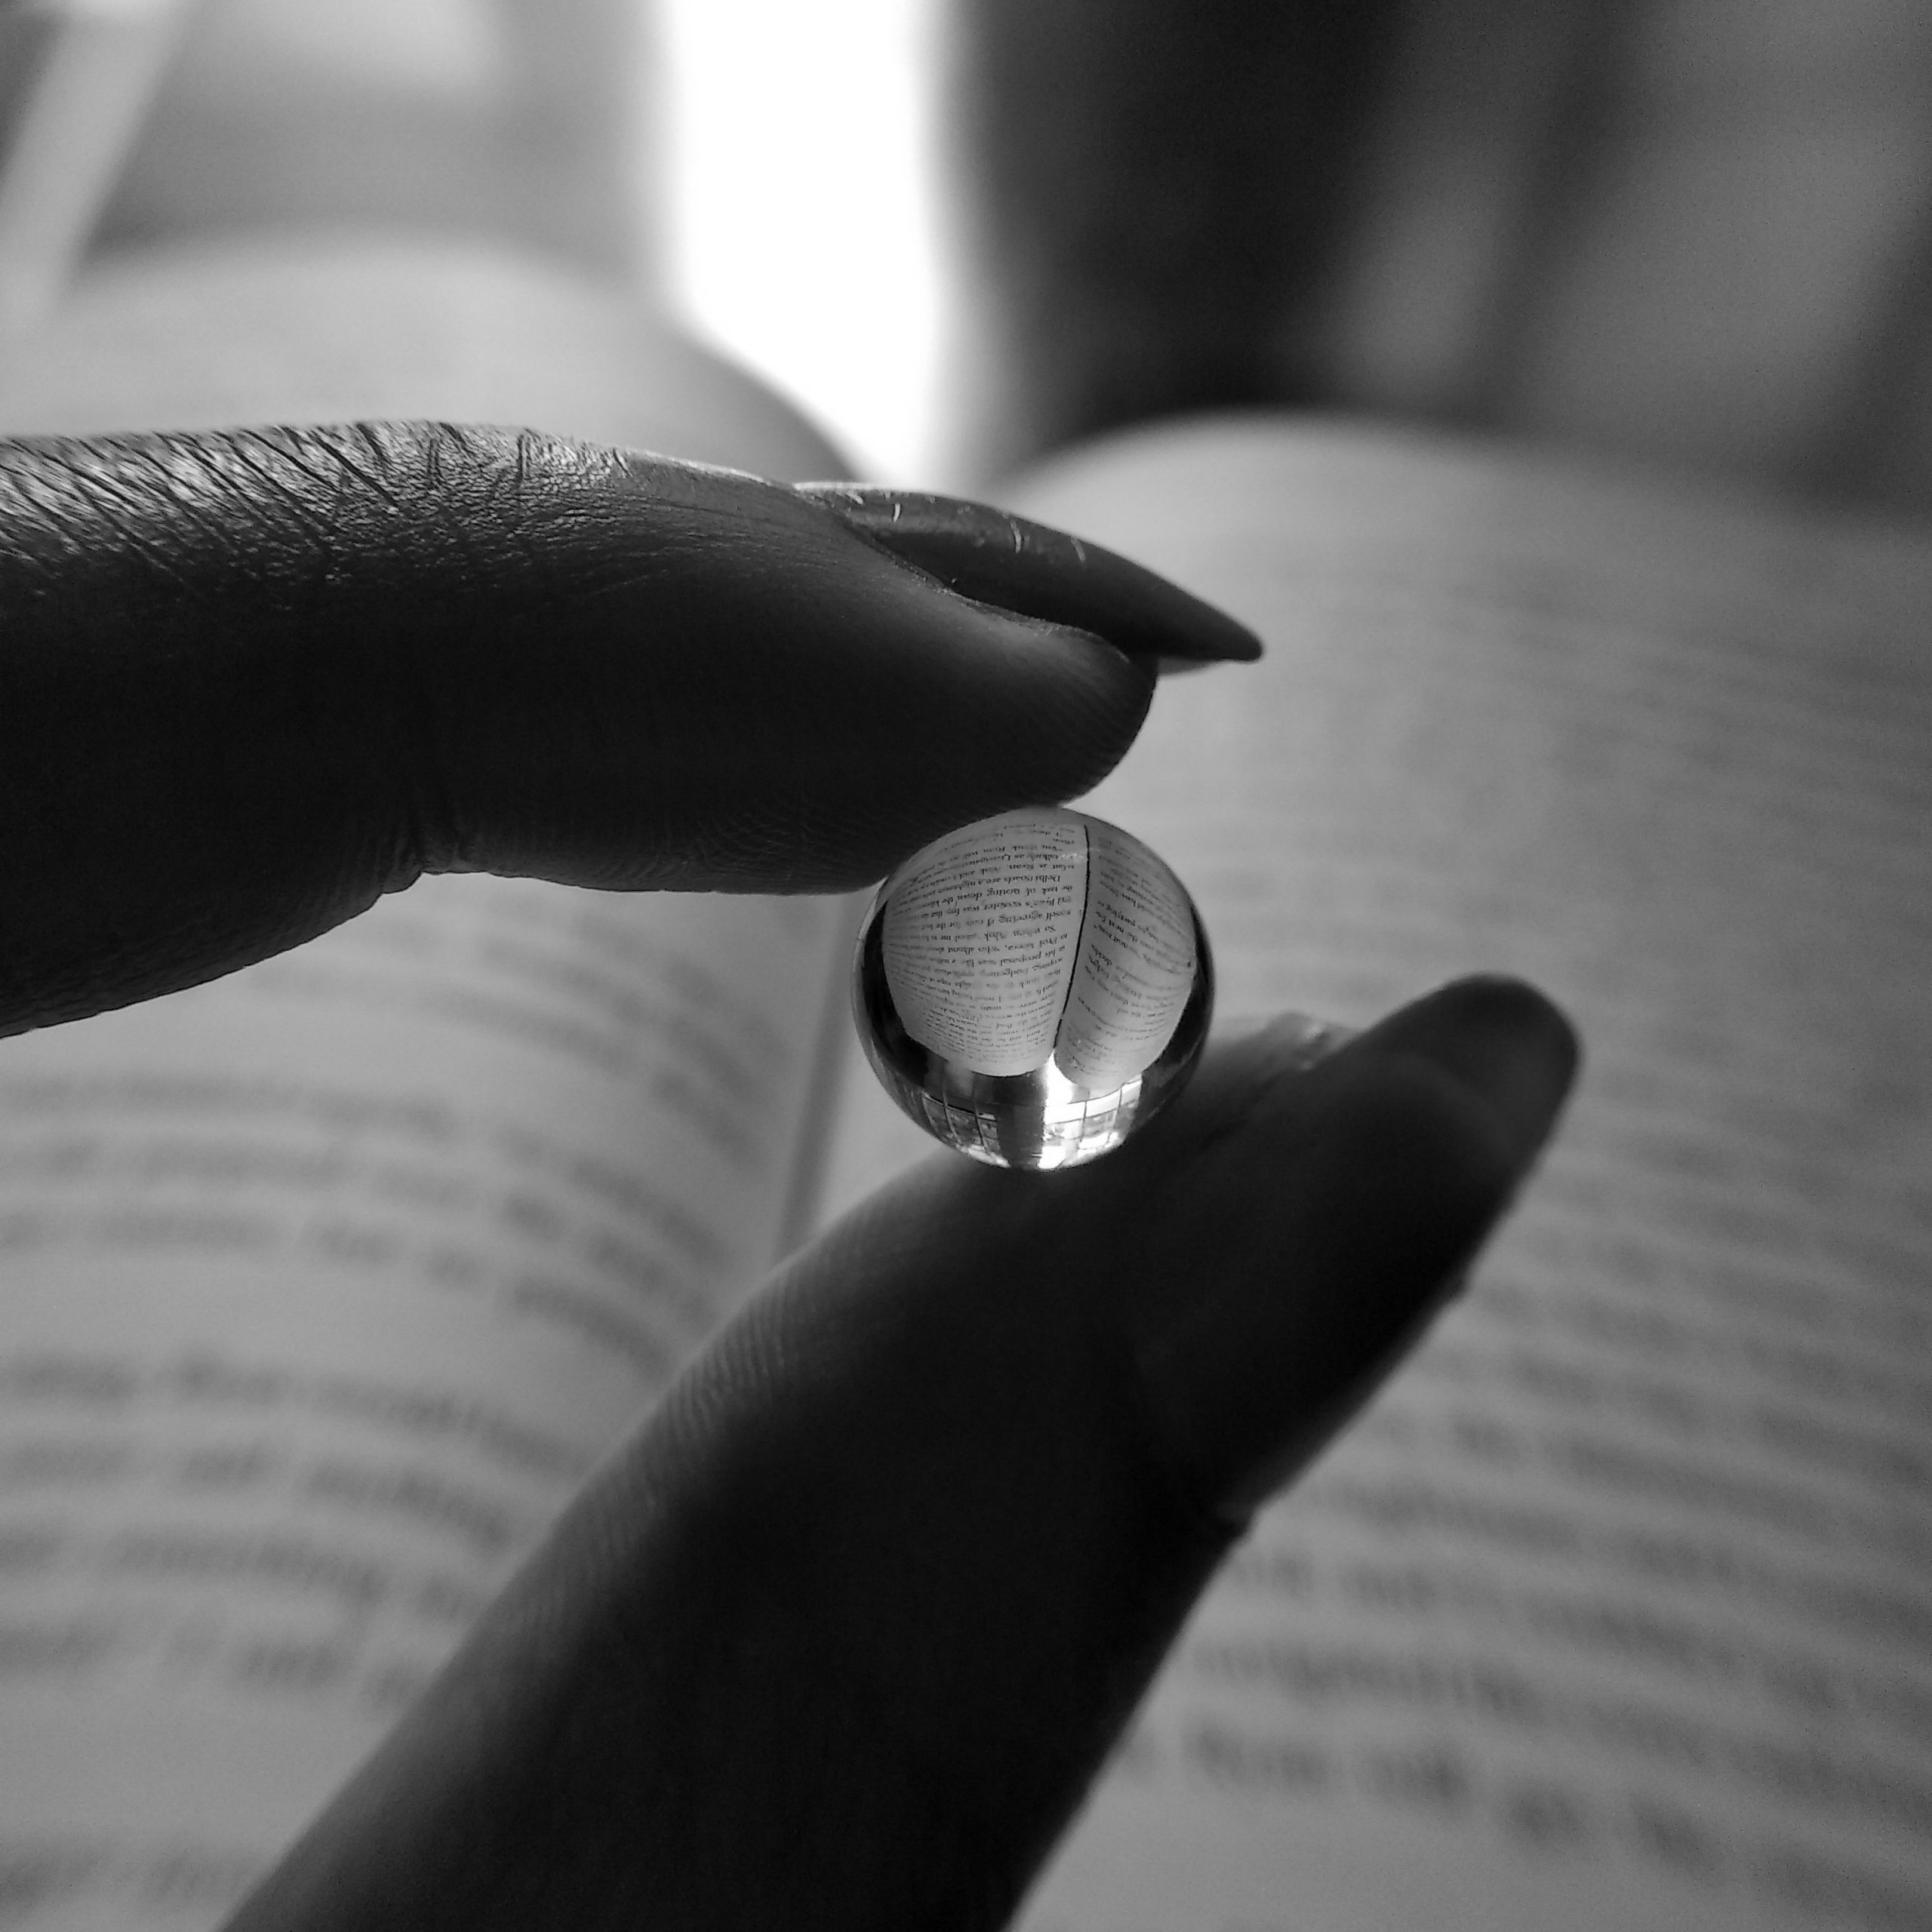 Holding a lensball in fingers